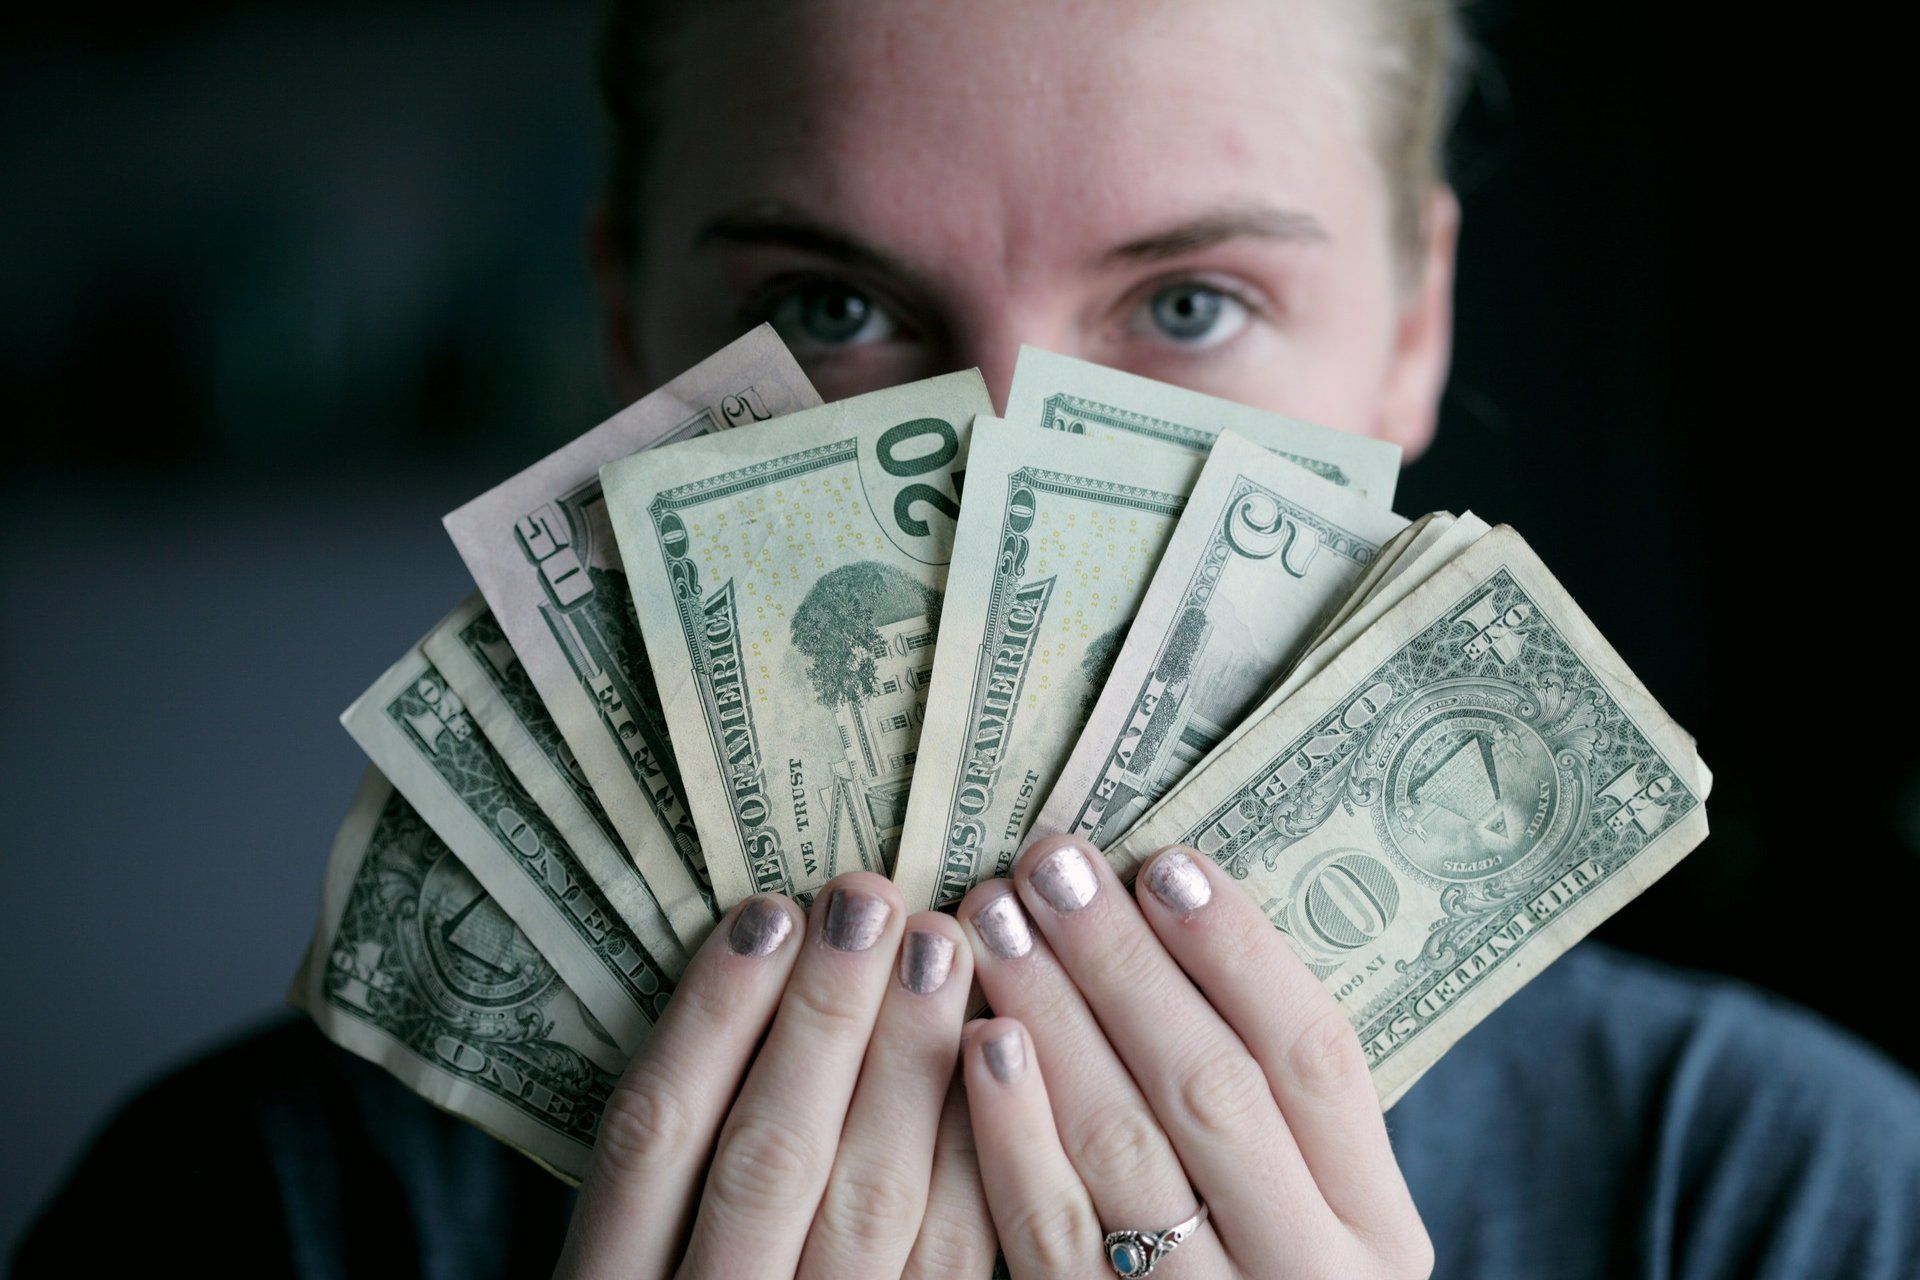 A woman is holding a fan of money in front of her face.